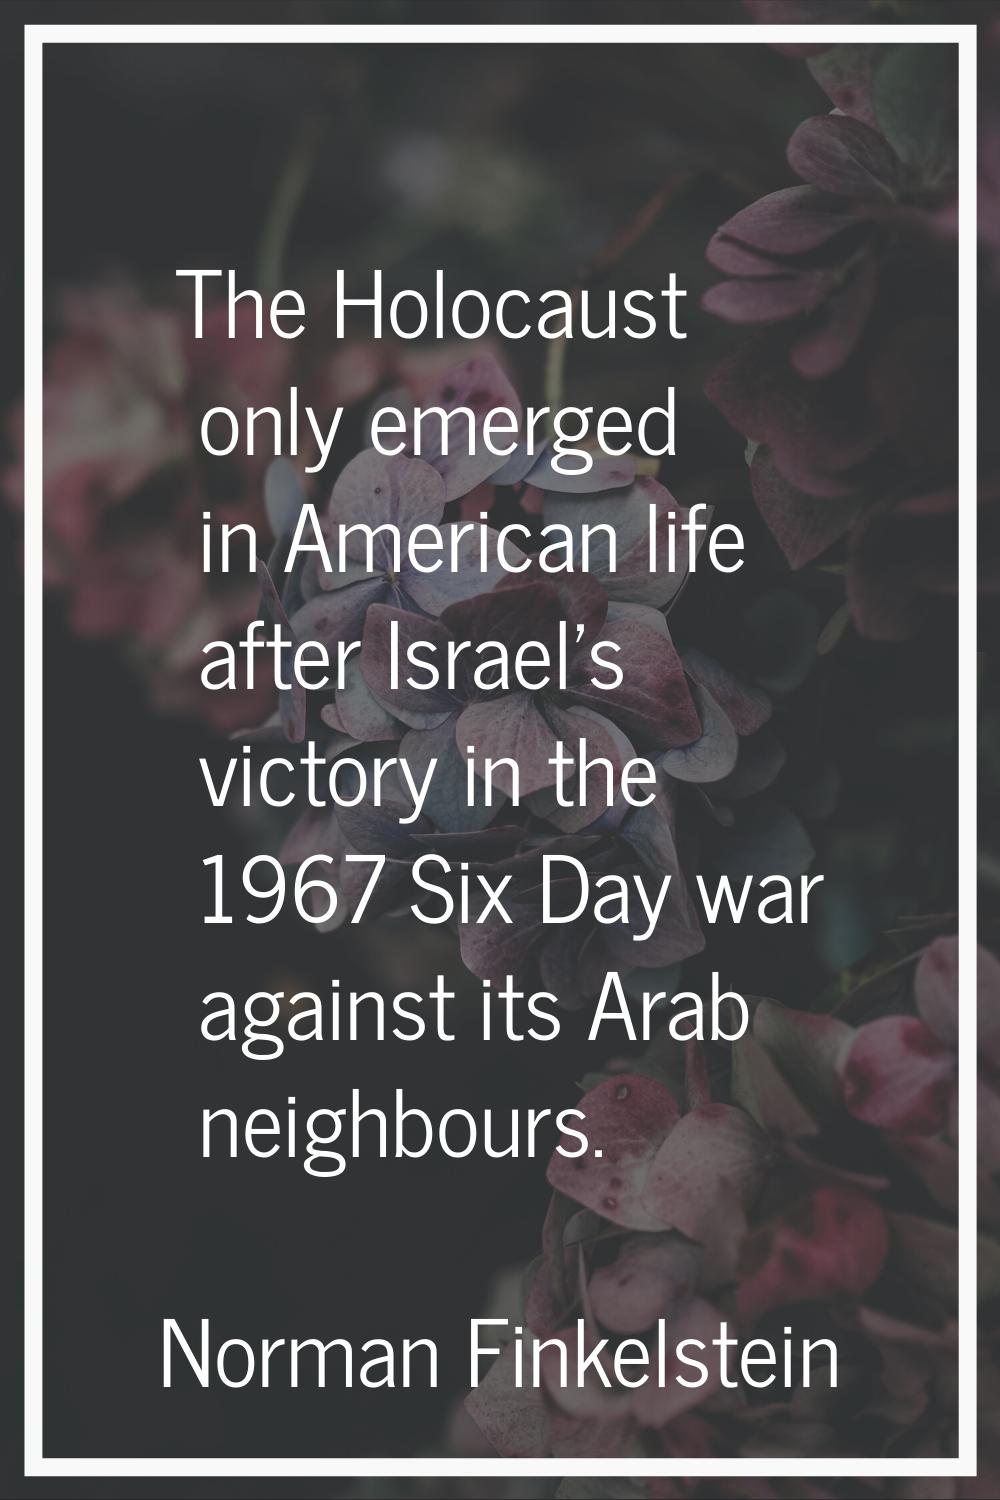 The Holocaust only emerged in American life after Israel's victory in the 1967 Six Day war against 